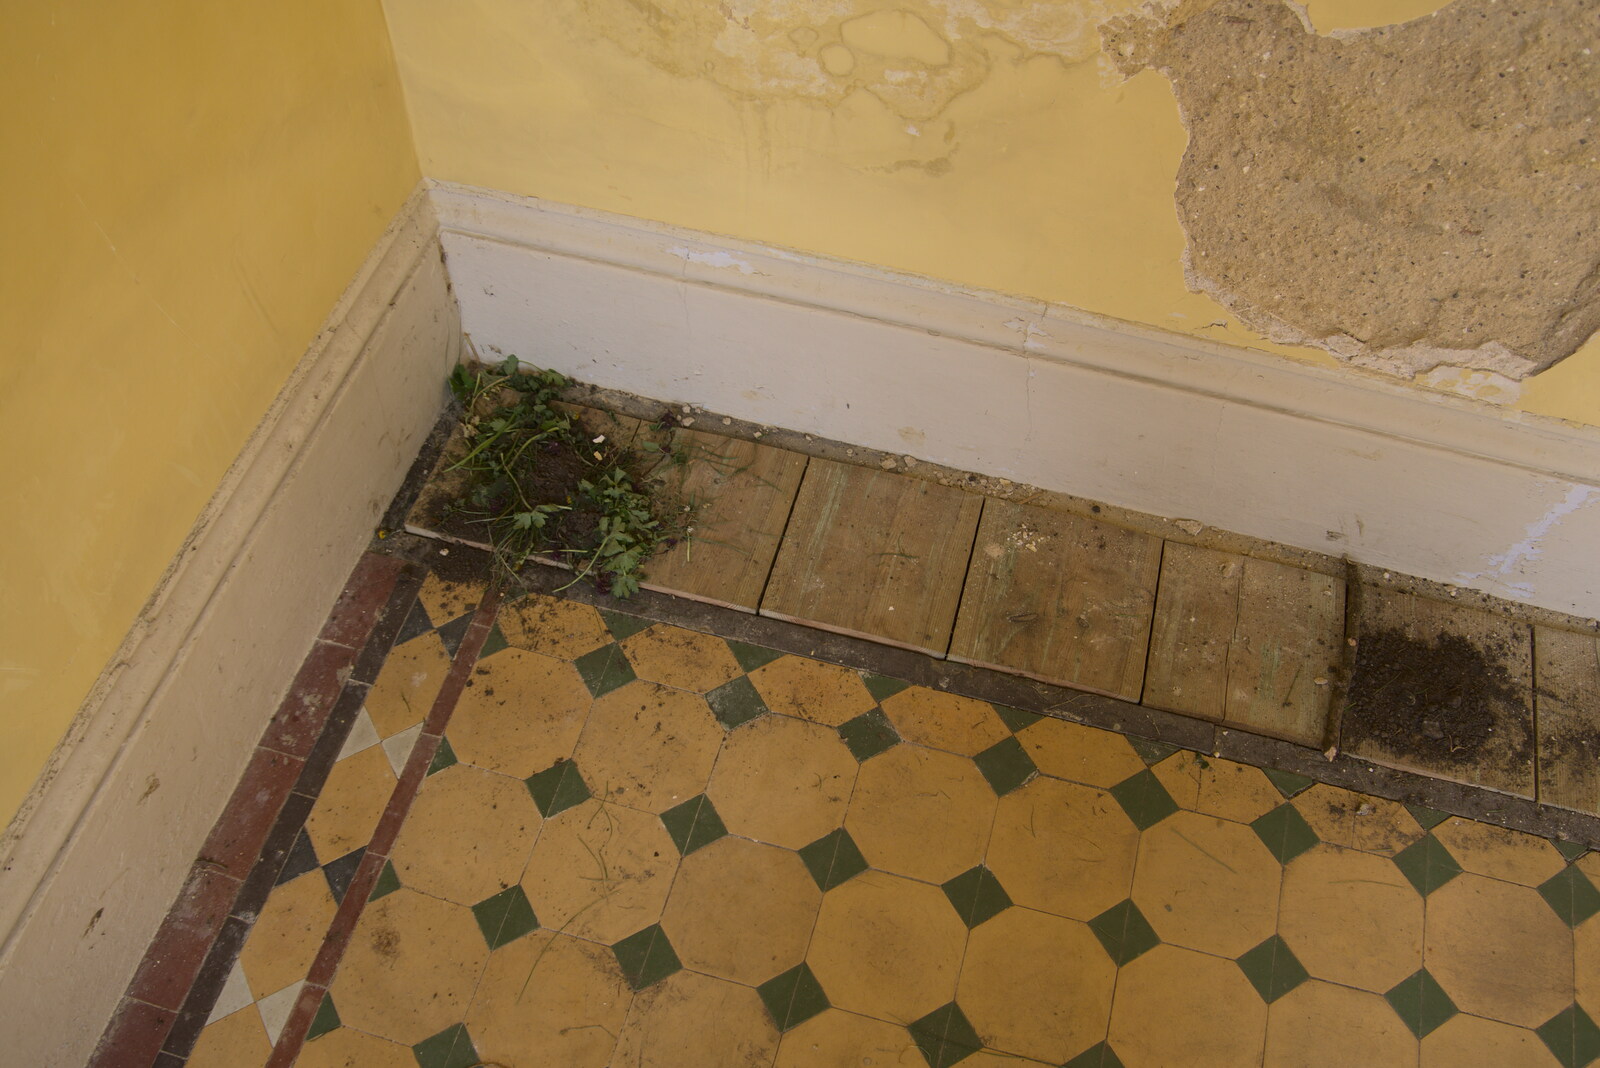 There's some garden on the floor from A Return to Ickworth House, Horringer, Suffolk - 11th April 2021